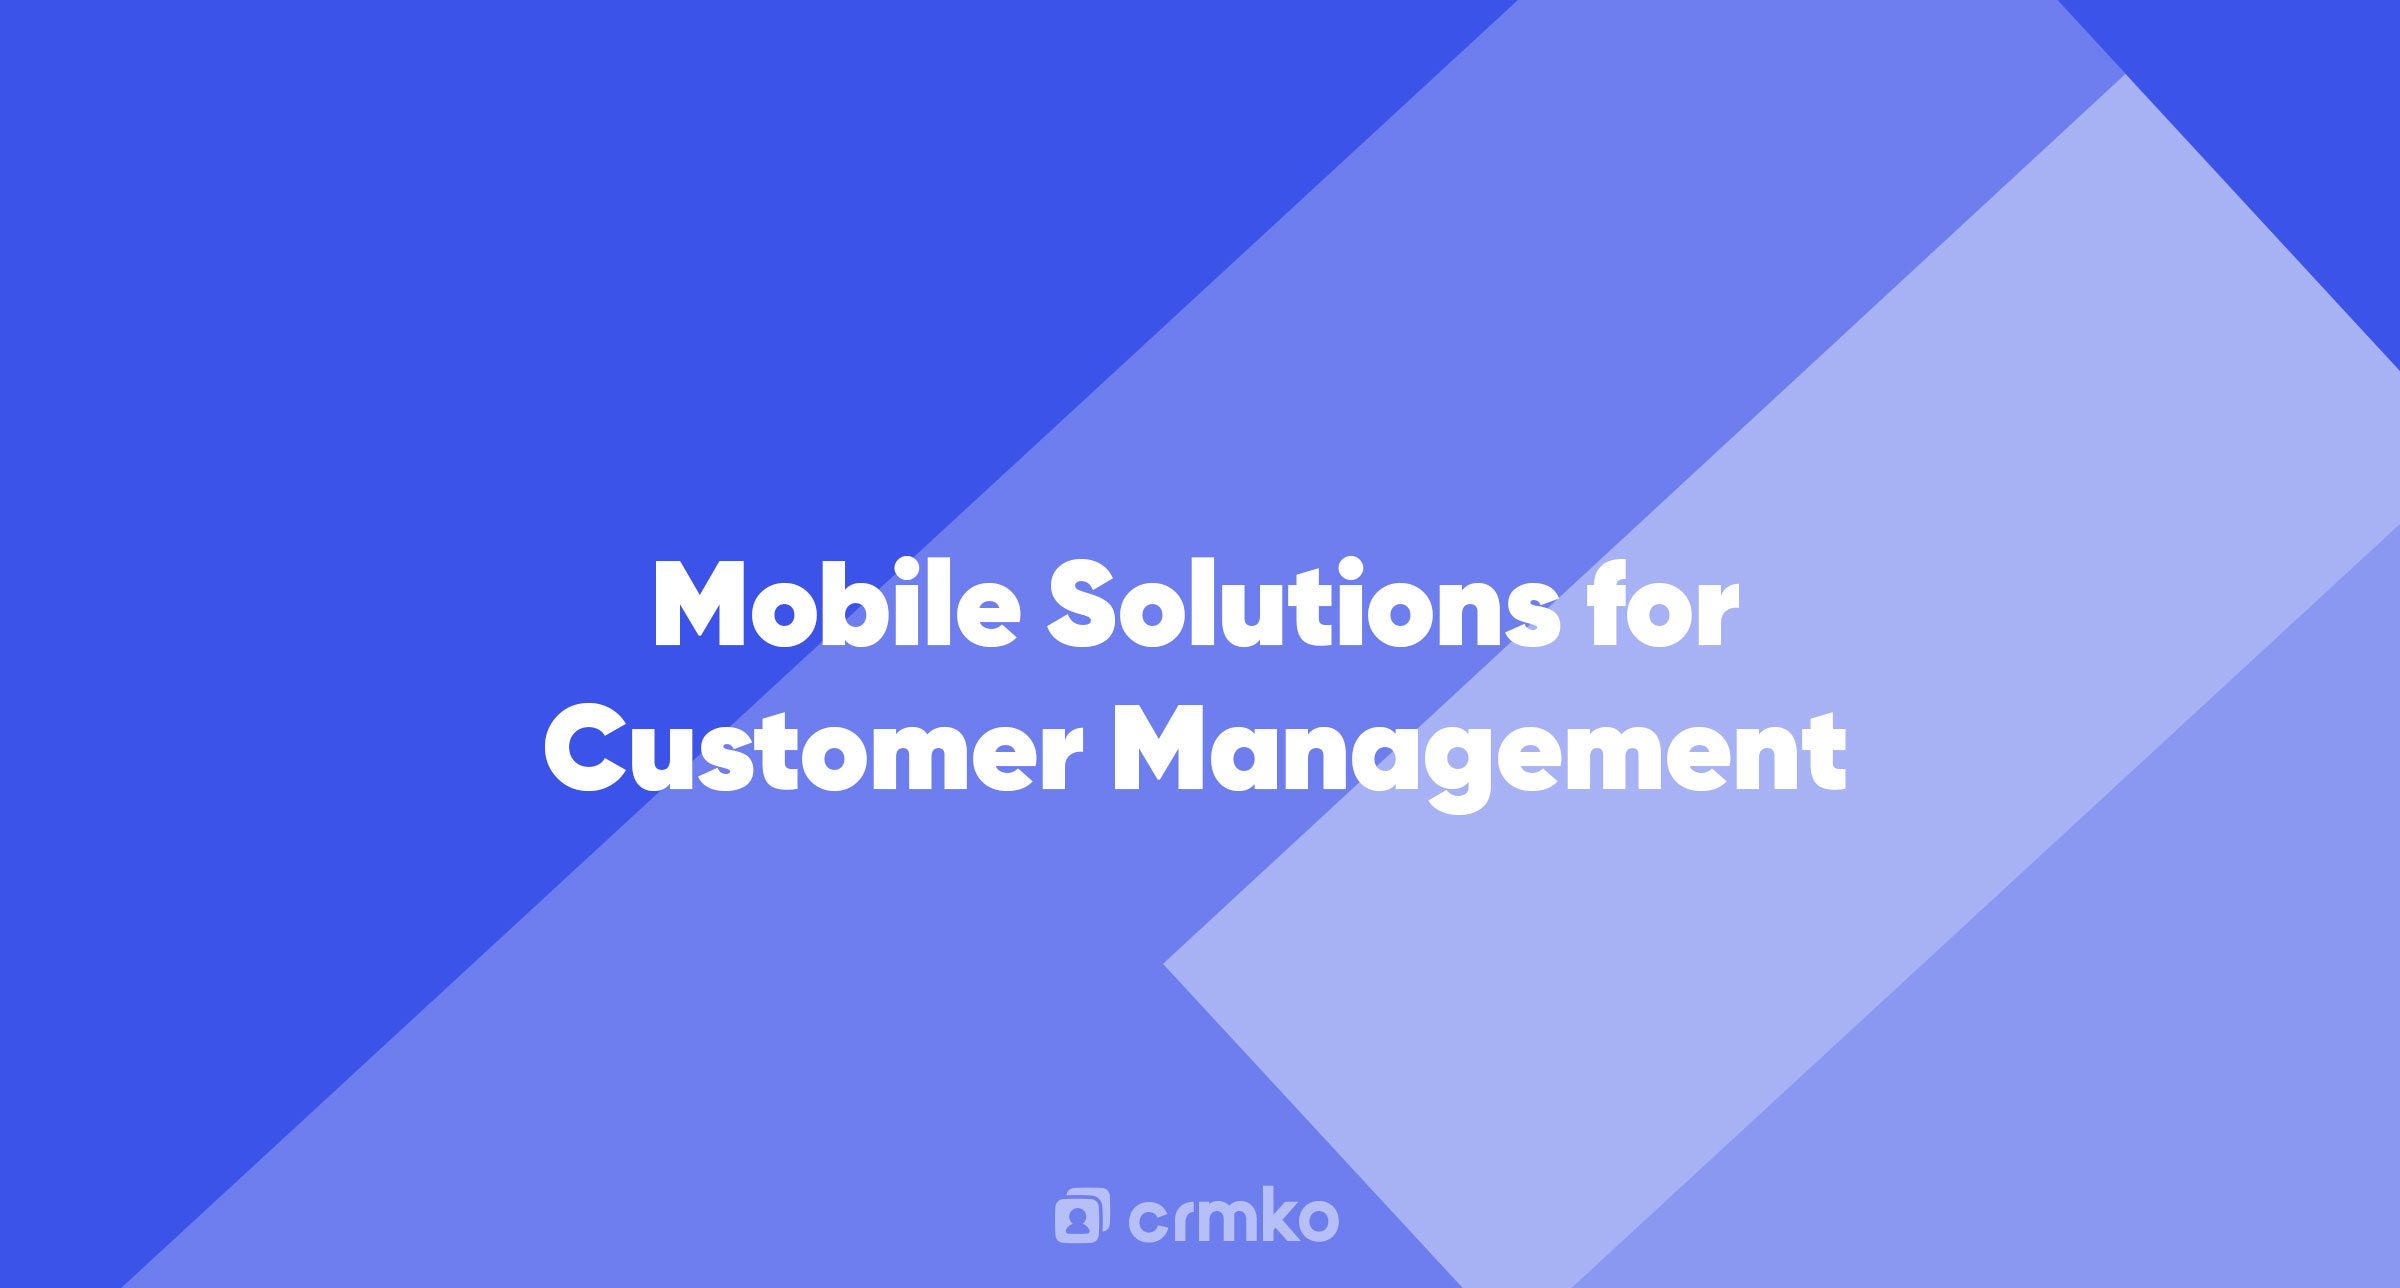 Article | Mobile Solutions for Customer Management: Why Are They Essential?